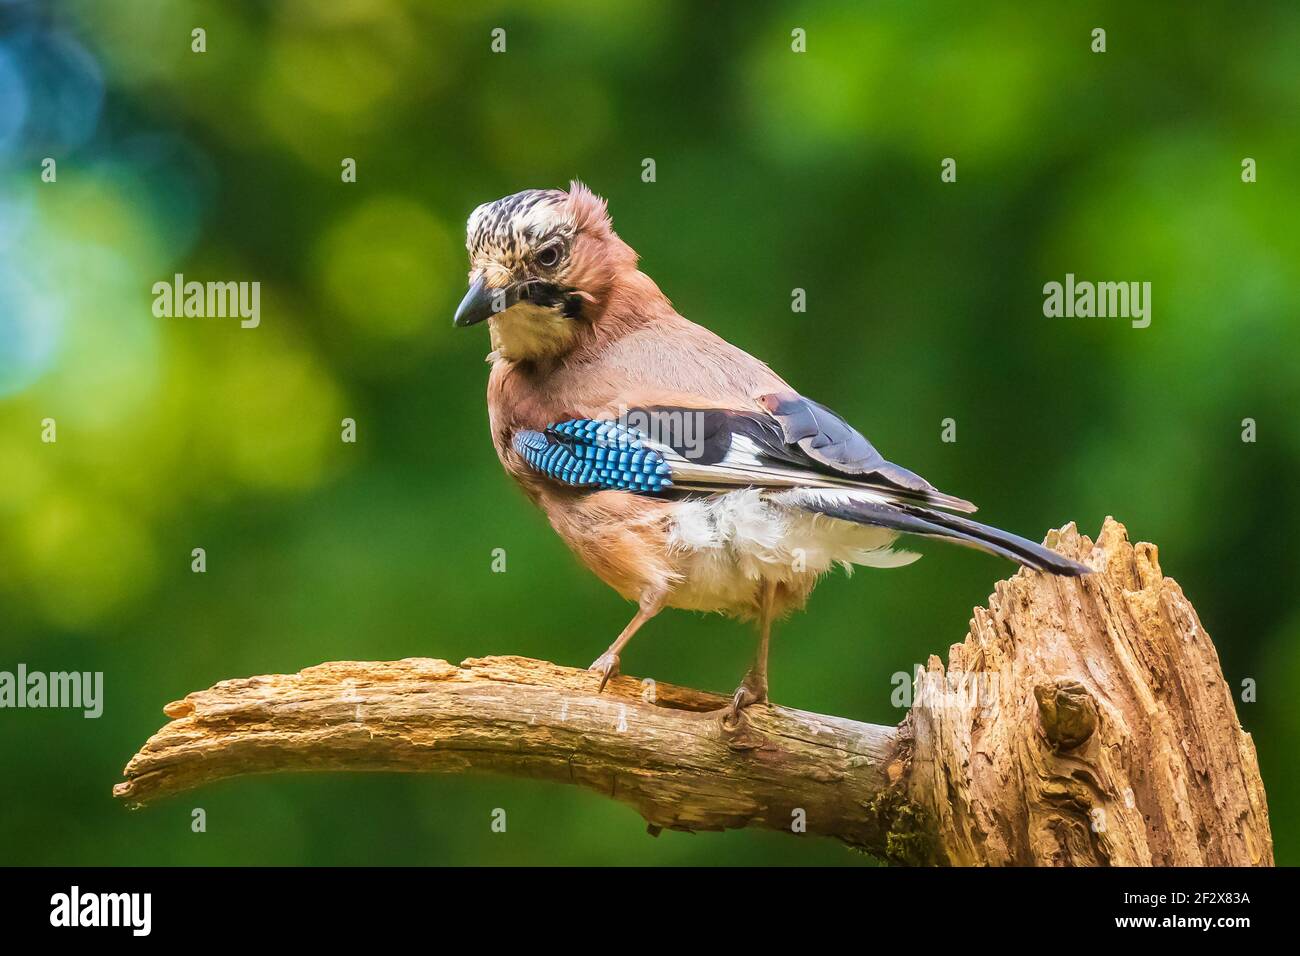 Closeup of a Eurasian jay bird Garrulus glandarius perched on a branch in a forest Summer colors on the background. Stock Photo